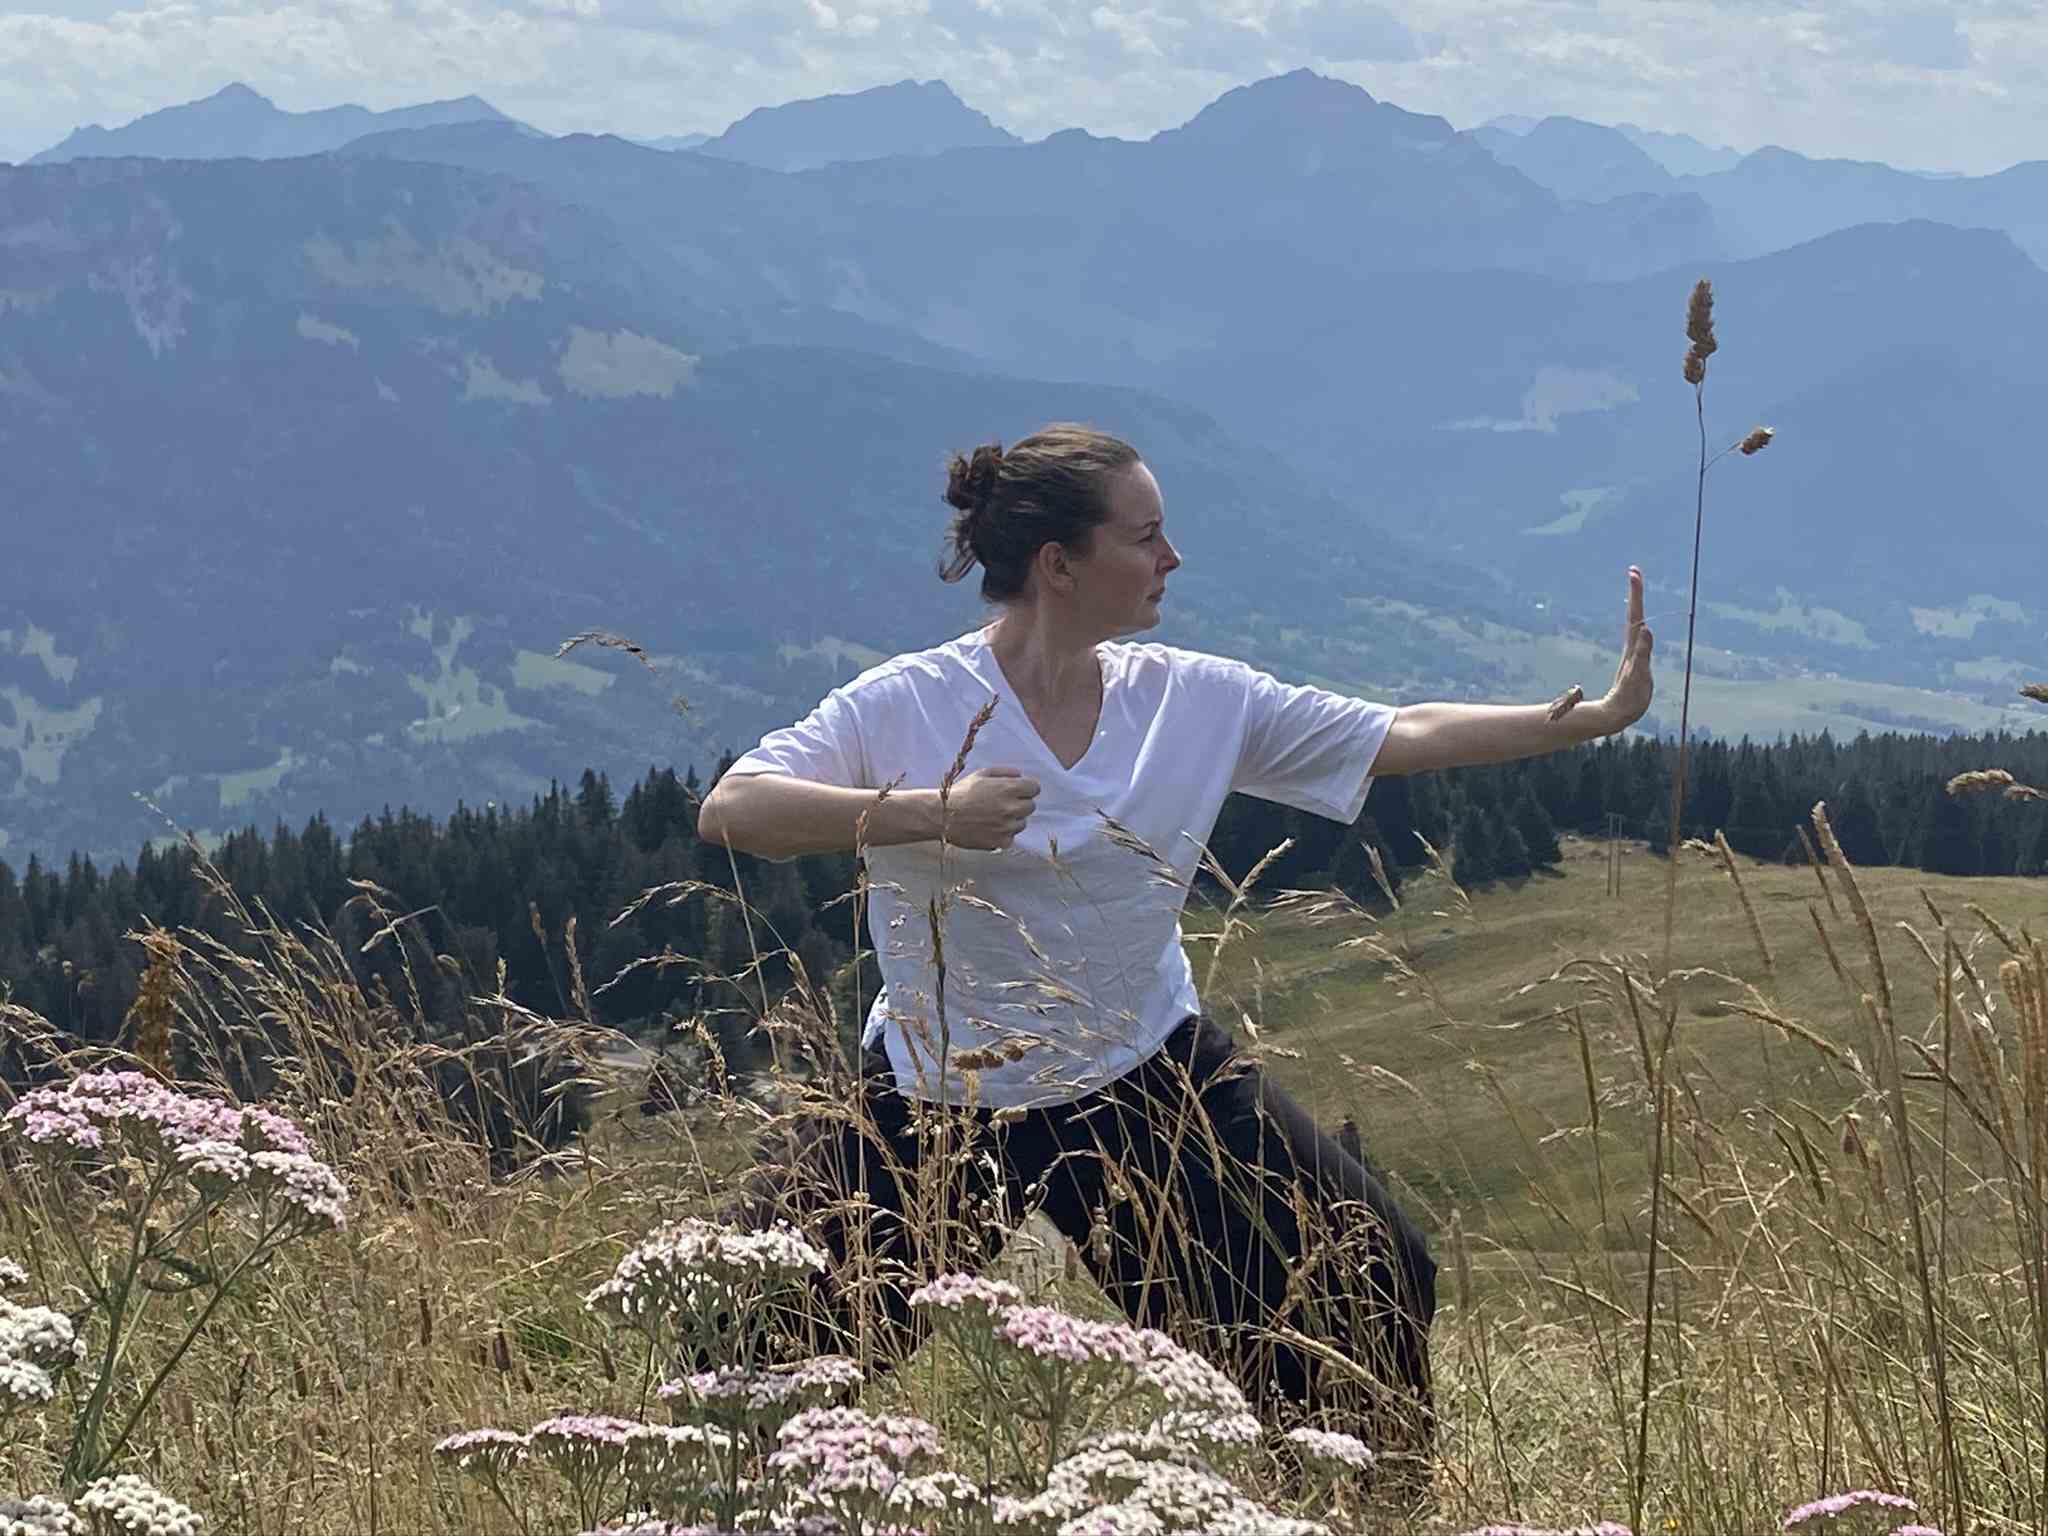 Qigong in the mountains